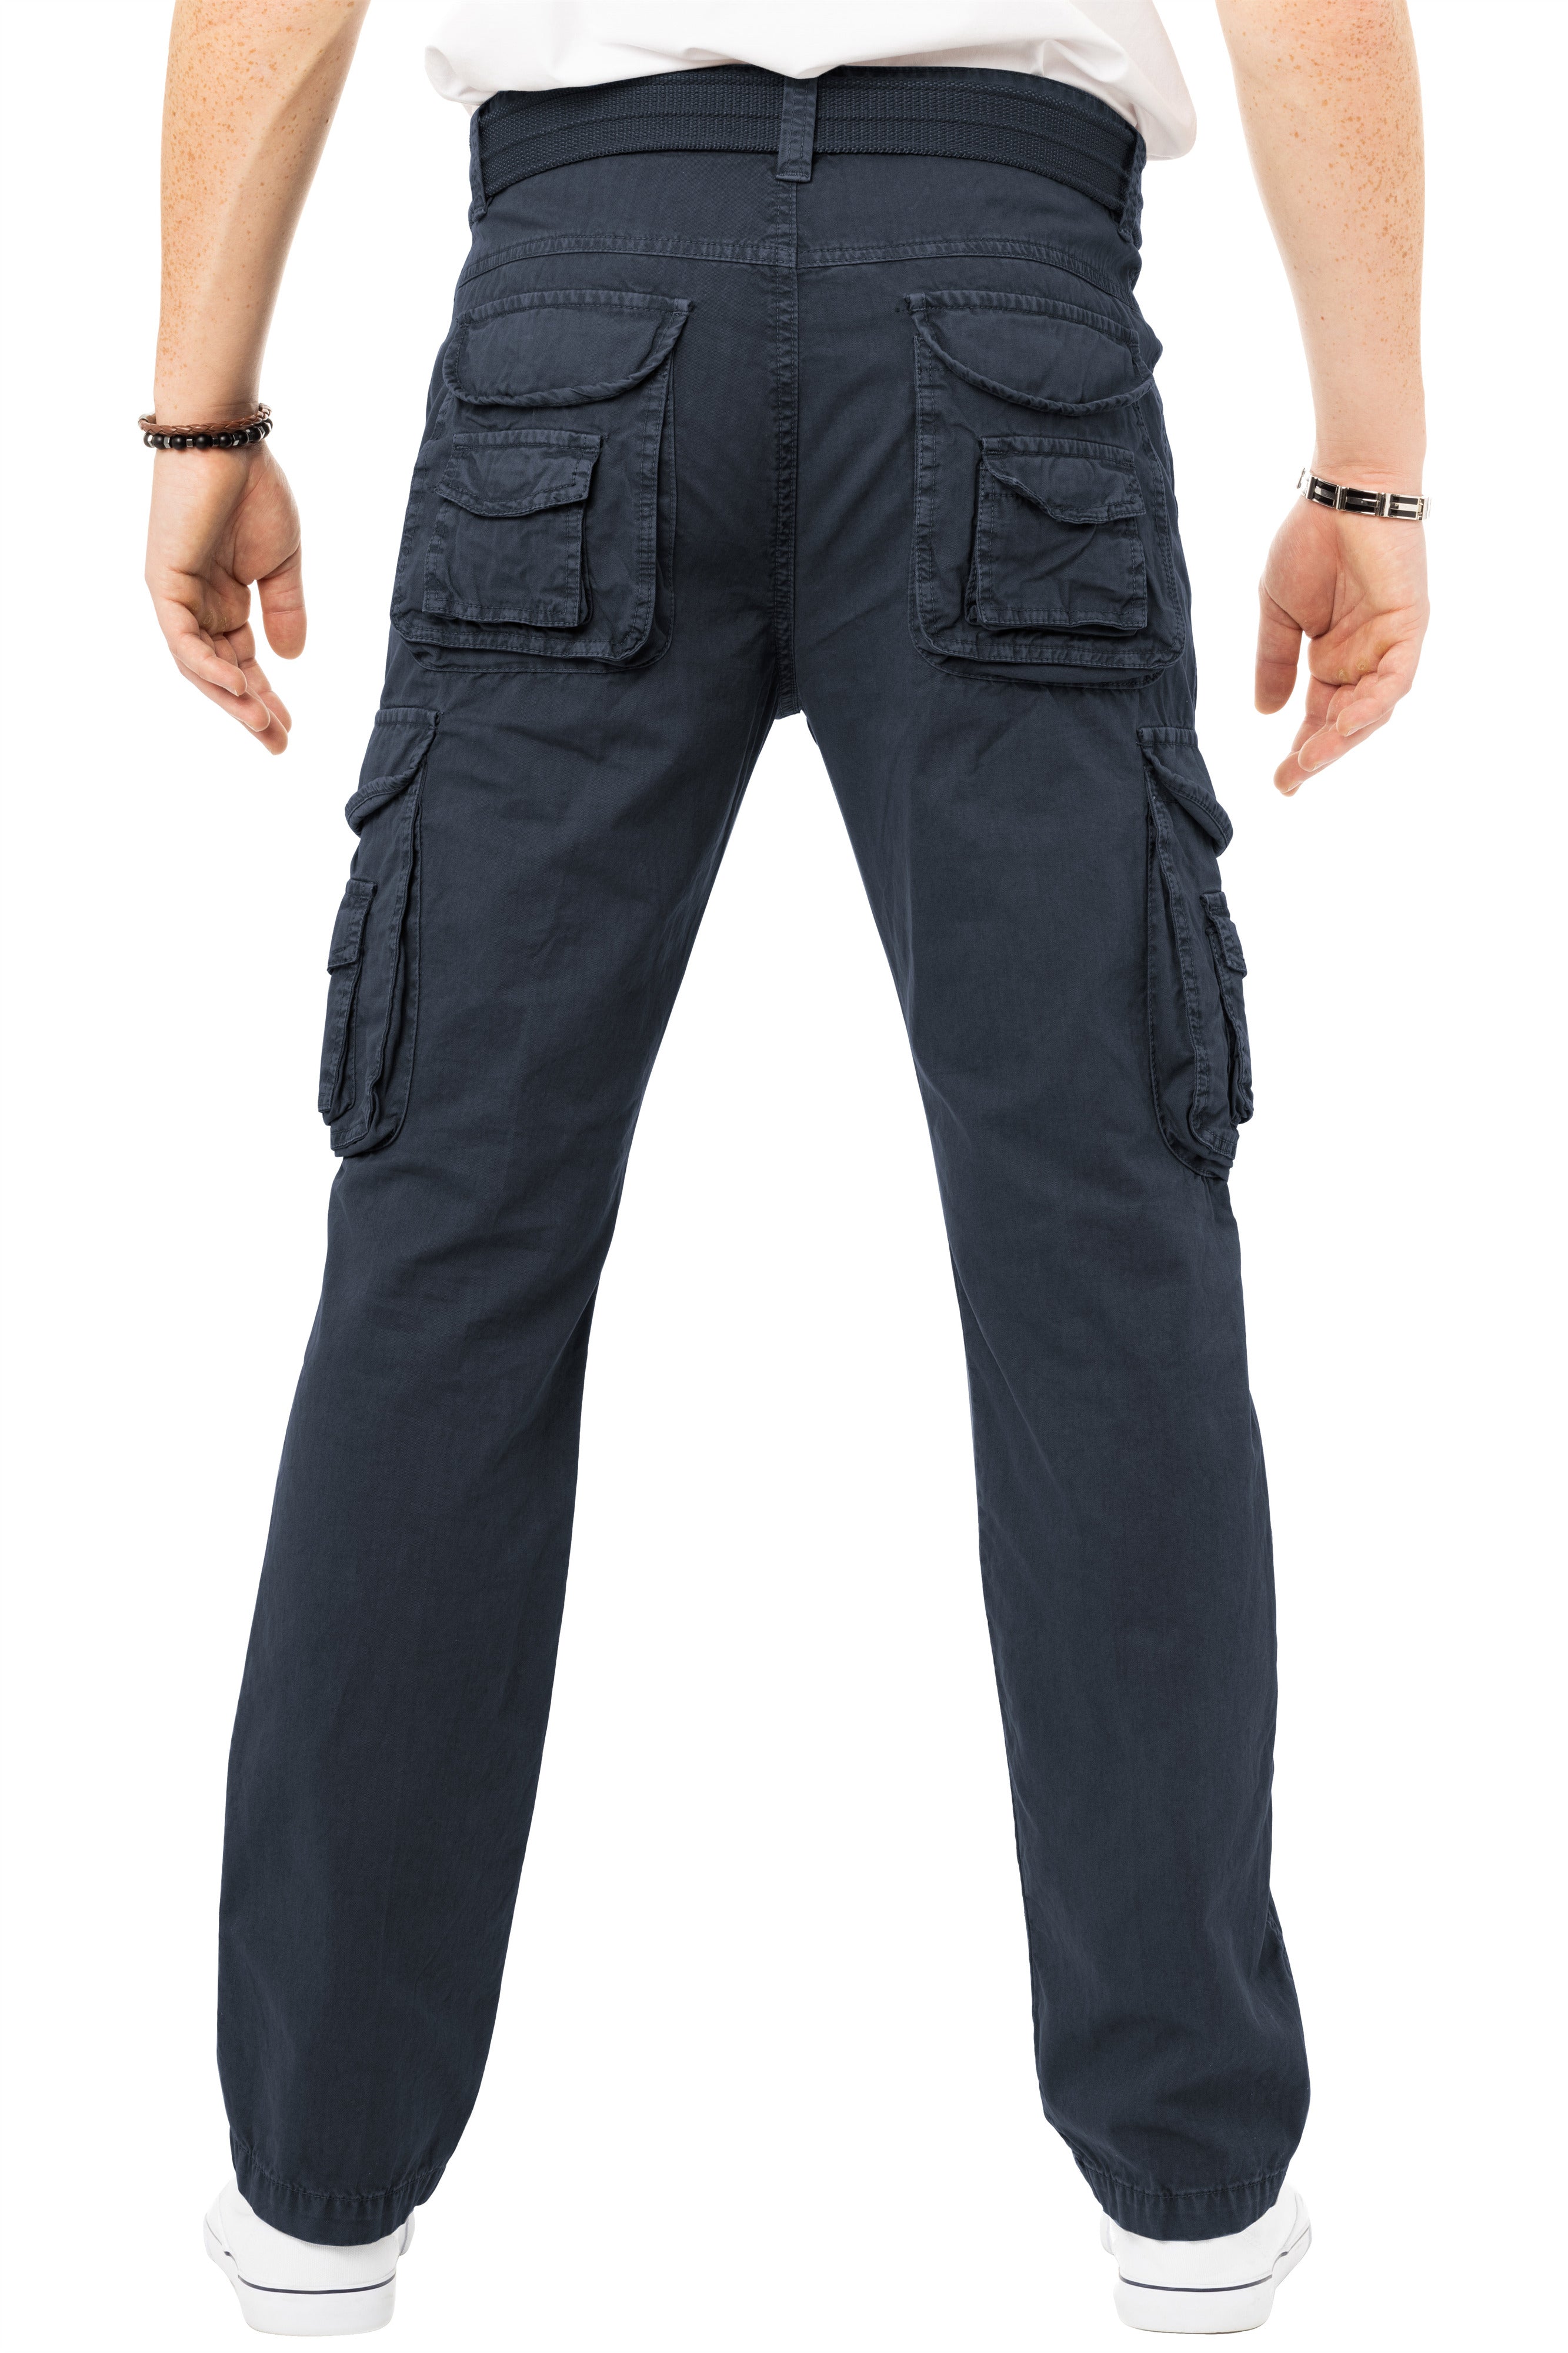 XRAY Men's Slim Fit Twill Chinos With Zipper Cargo Pockets